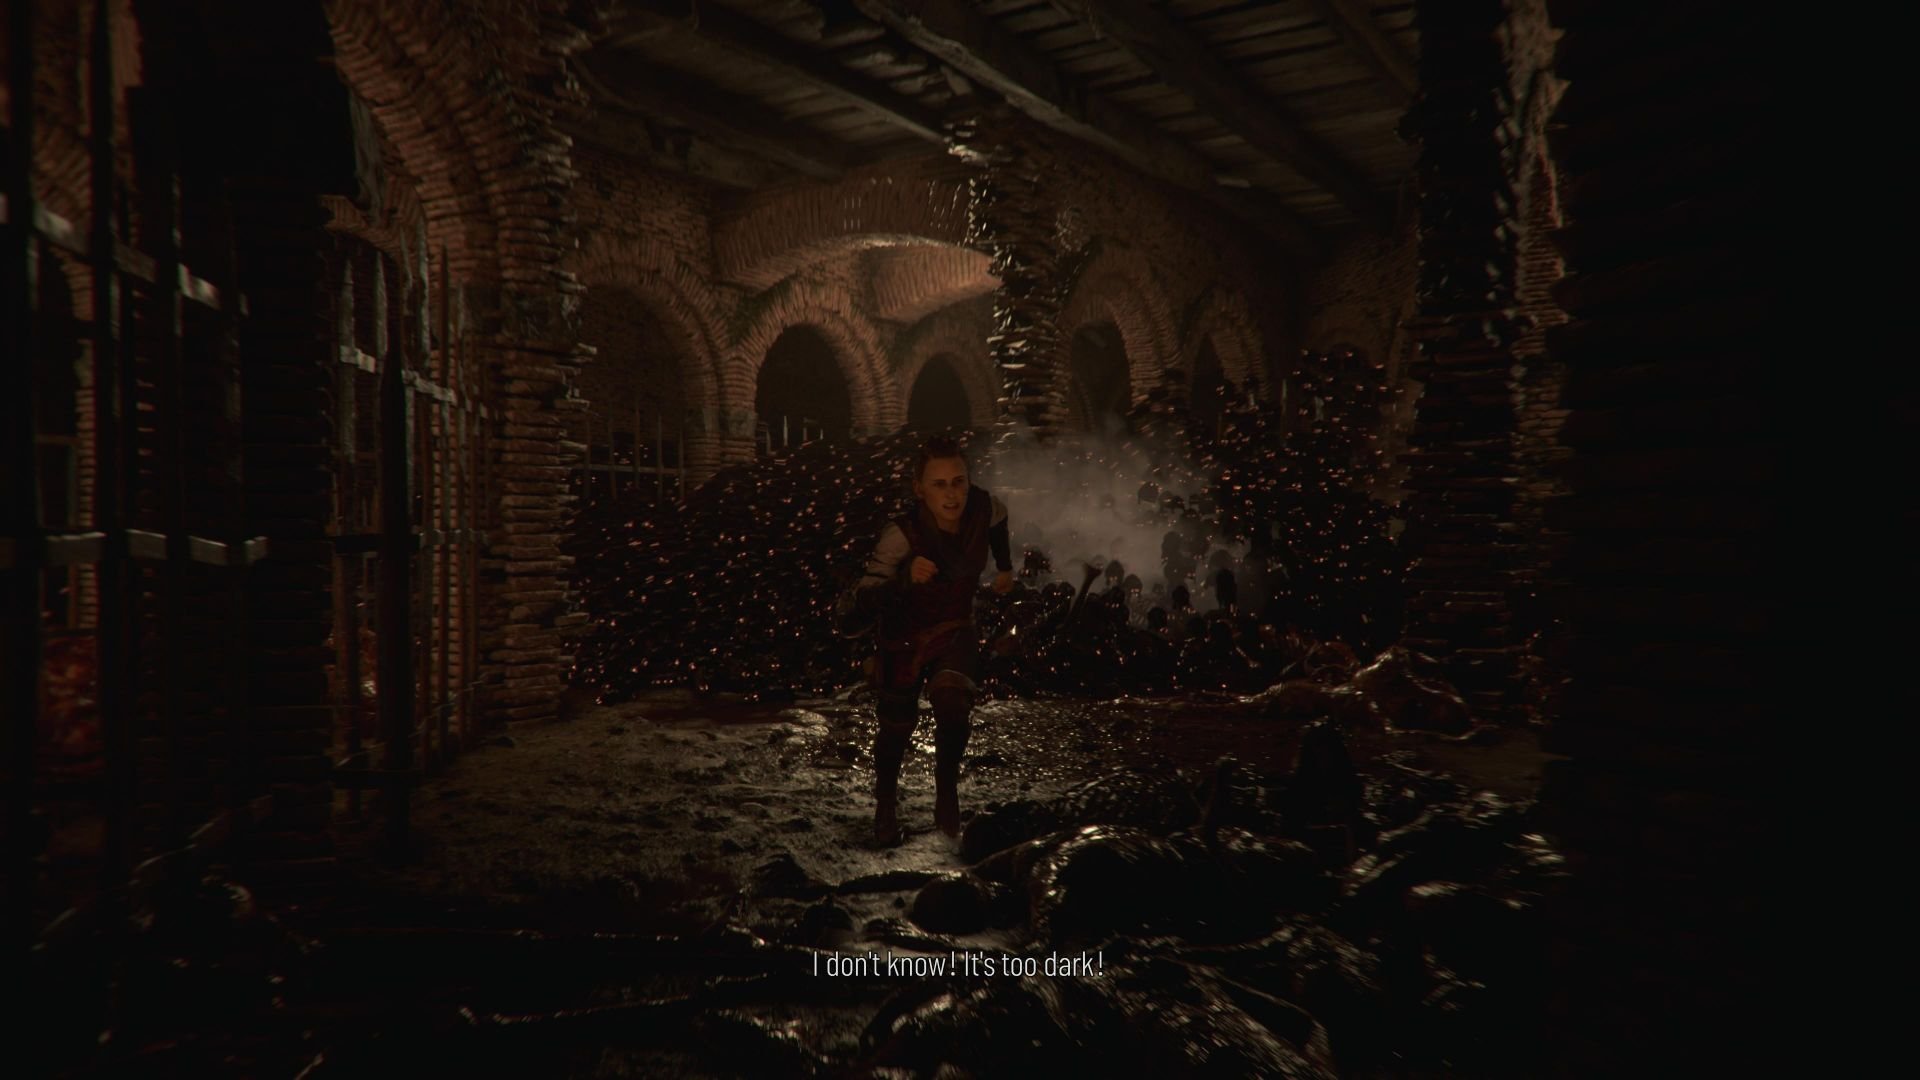 A Plague Tale: Innocence Can't Decide If It's Prestige or Horror